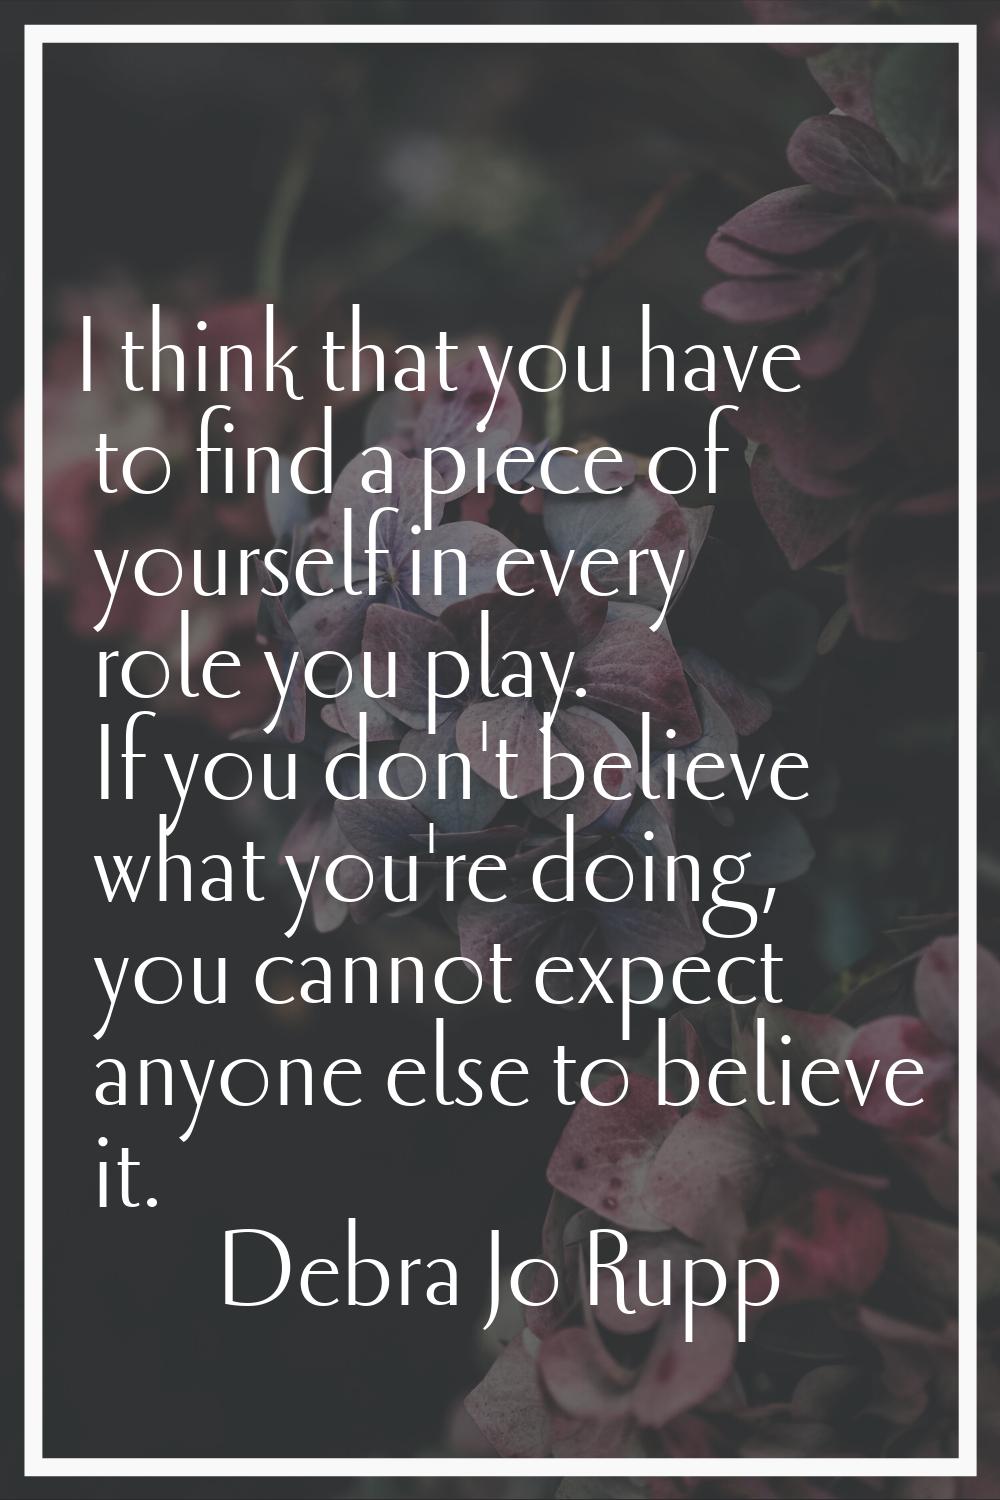 I think that you have to find a piece of yourself in every role you play. If you don't believe what